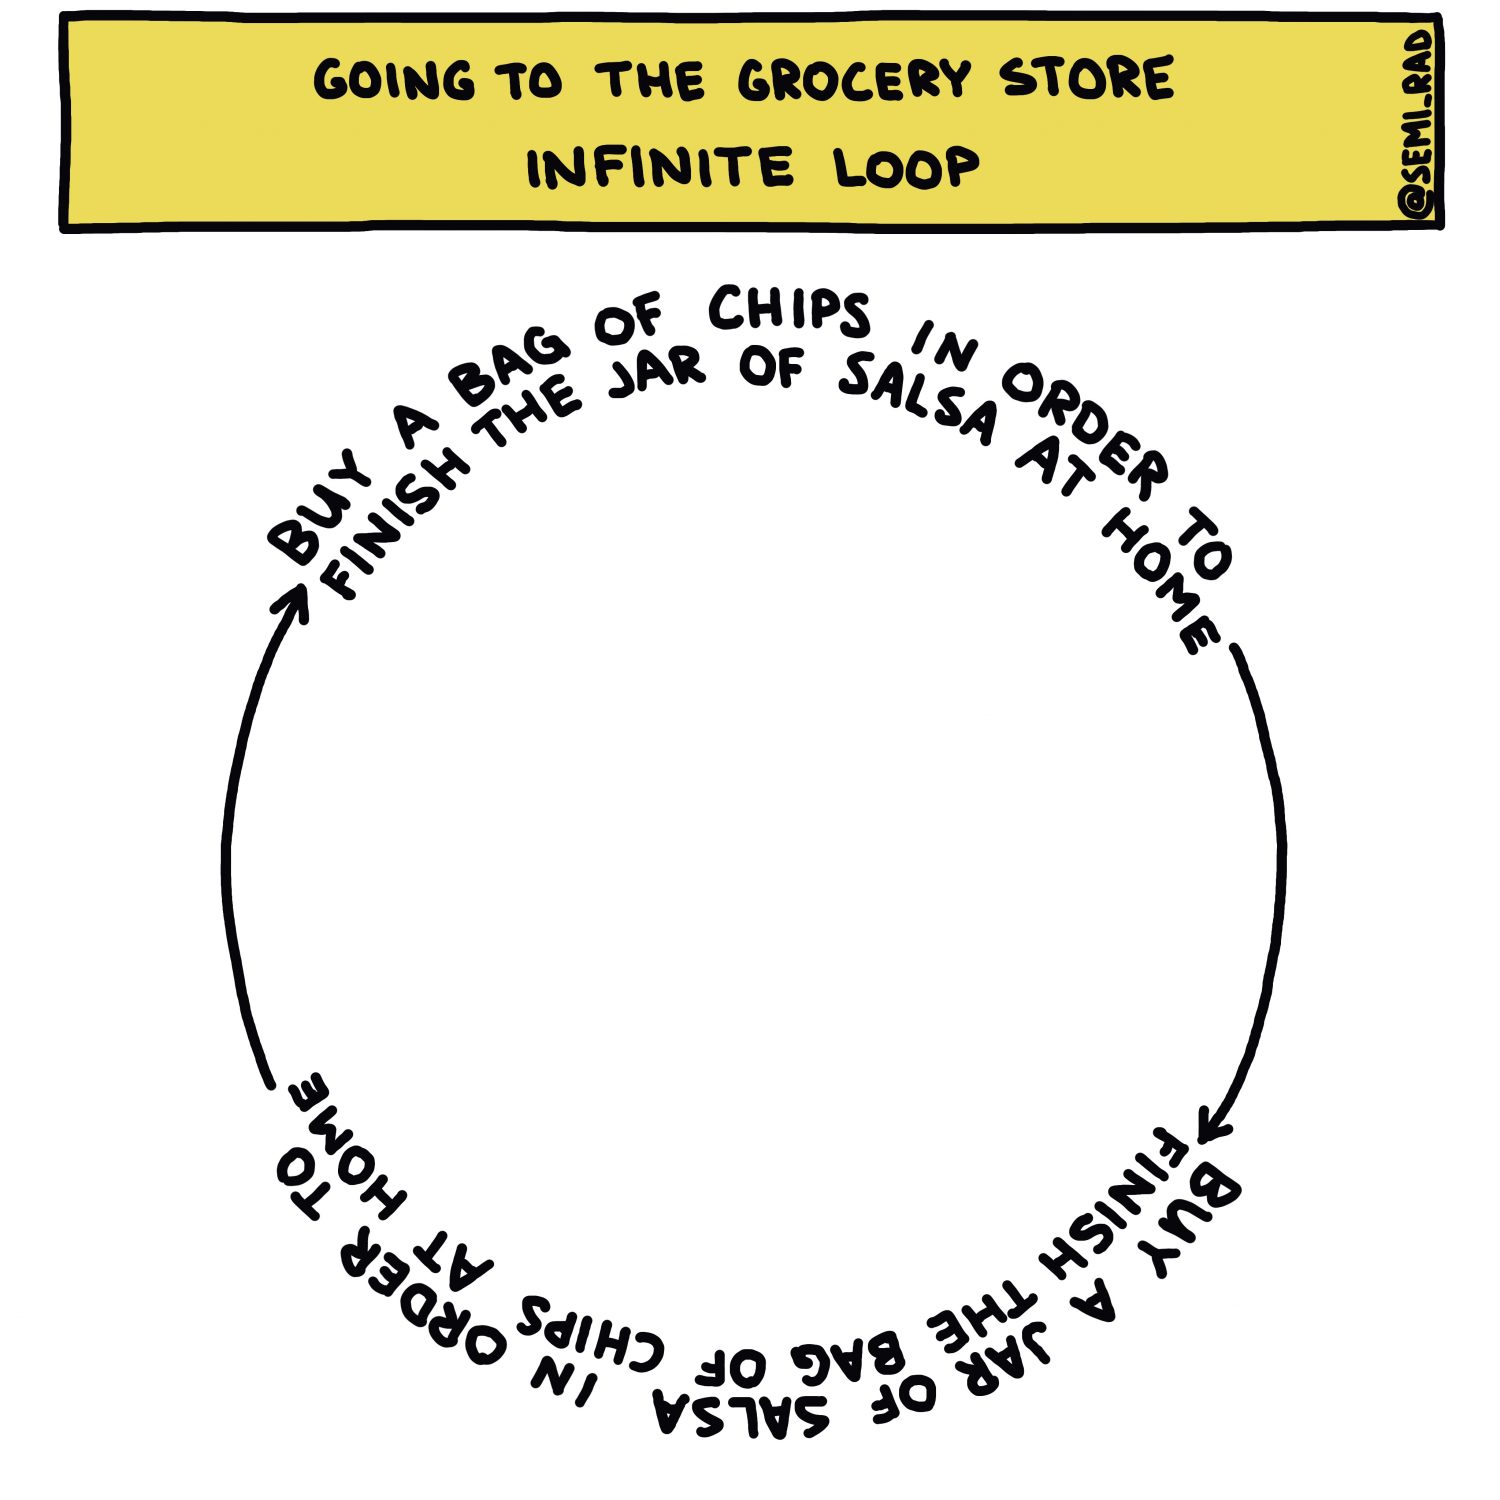 semi-rad chart: Going To The Grocery Store Infinite Loop